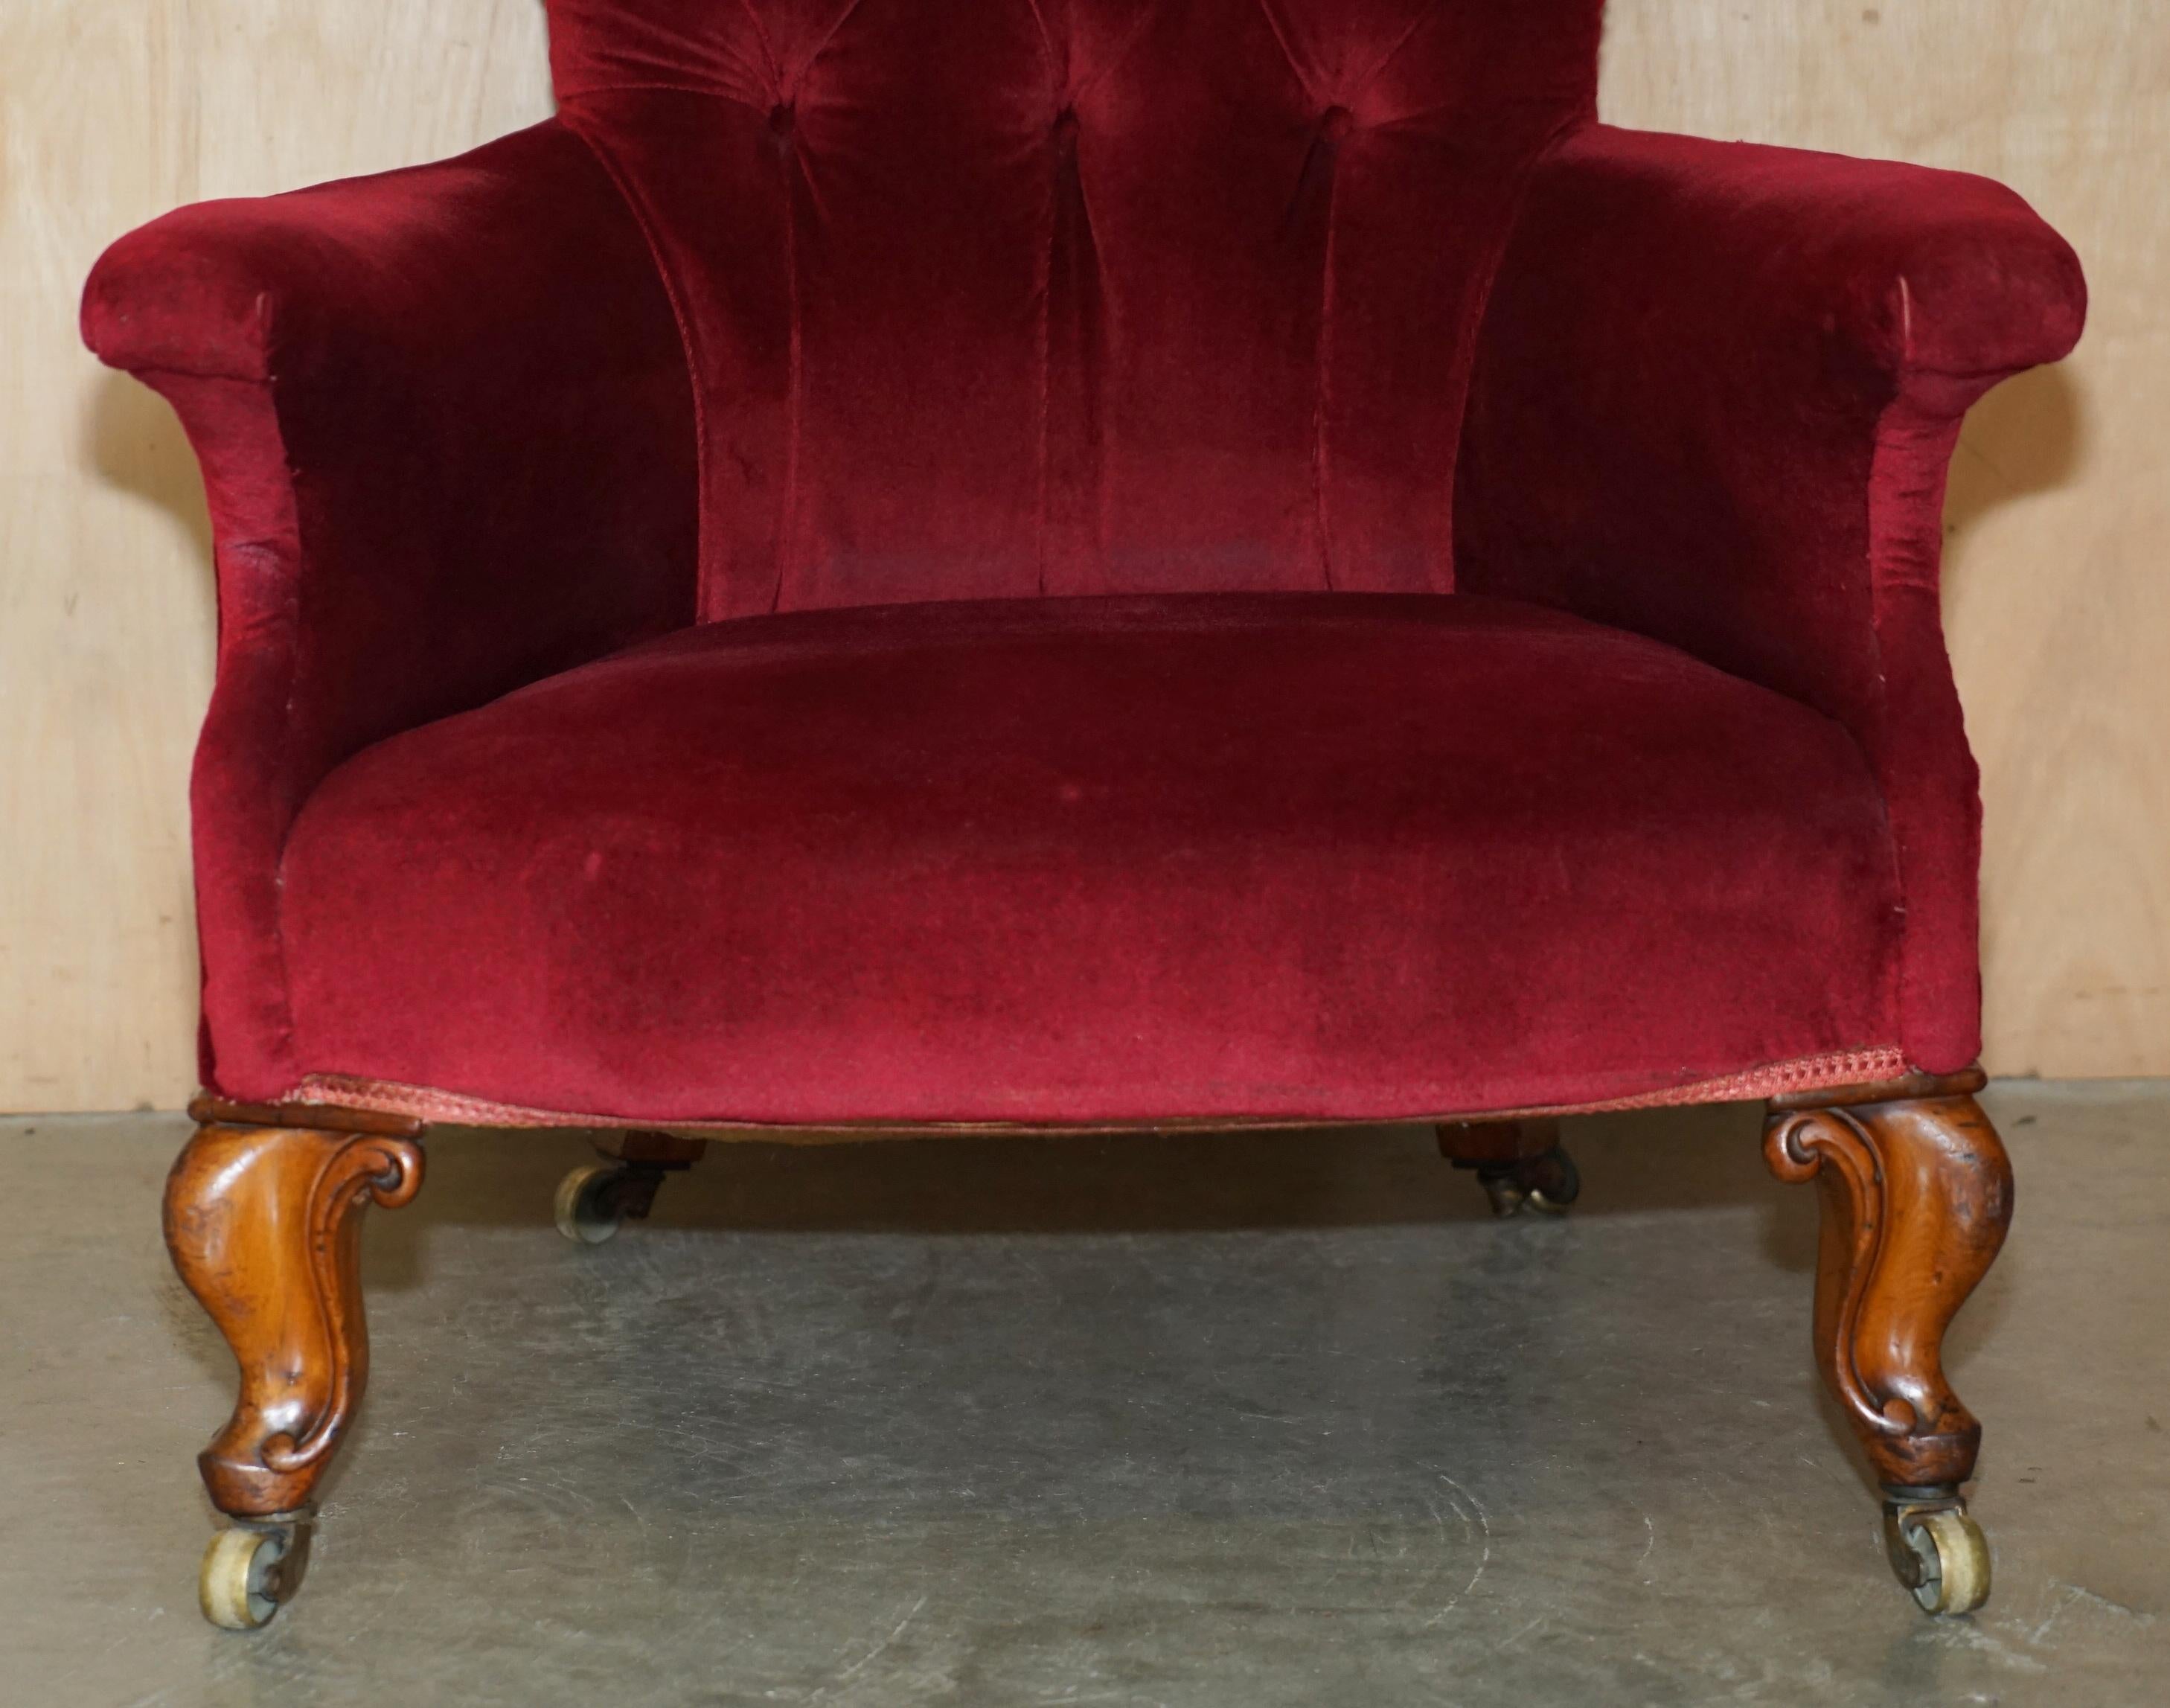 Upholstery EXQUISITE ANTIQUE WILLIAM IV 1830 CHESTERFIELD TUFTED WALNUT LIBRARY ARMCHAiR For Sale